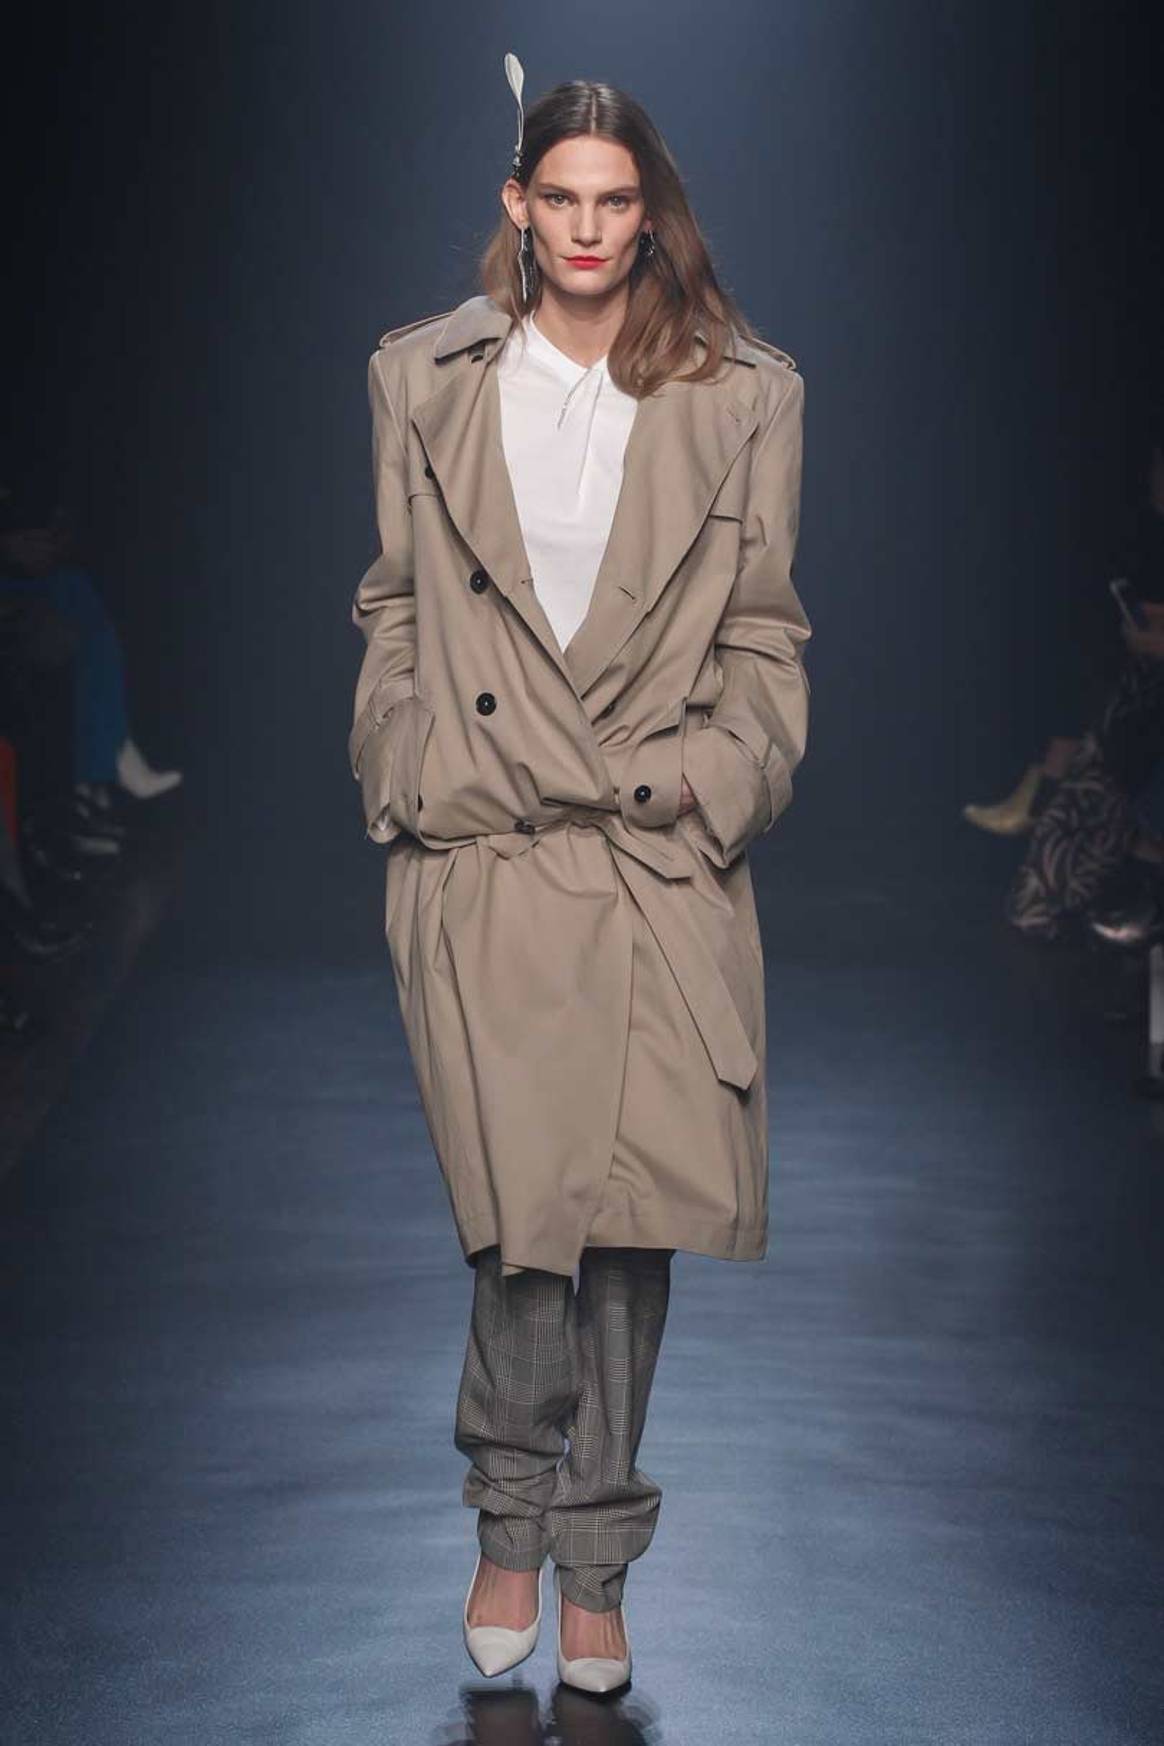 Zadig & Voltaire explores contradictions at New York Fashion Week